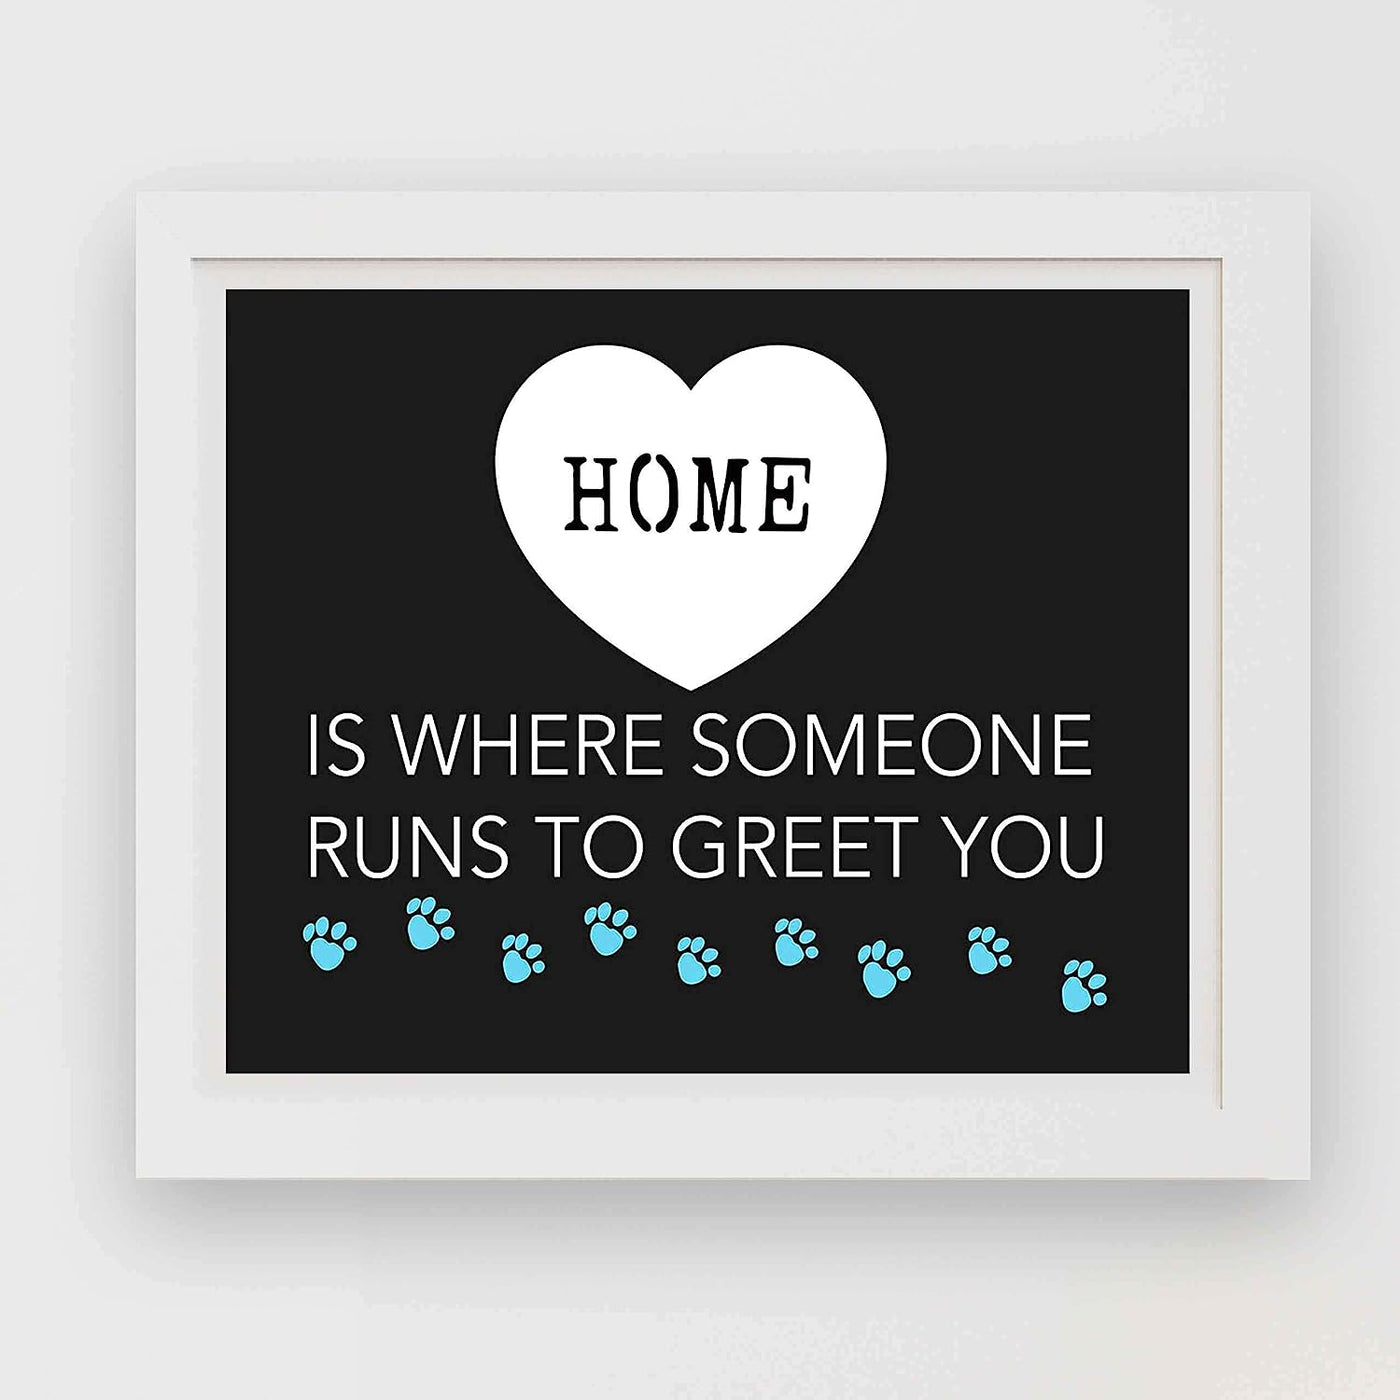 Home-Where Someone Runs To Greet You- Funny Dog Wall Art Sign-10 x 8" Print Wall Decor-Ready to Frame. Modern Typographic Art Print for Home-Kitchen-Vet's Decor. Humorous Reminder Who Loves You!